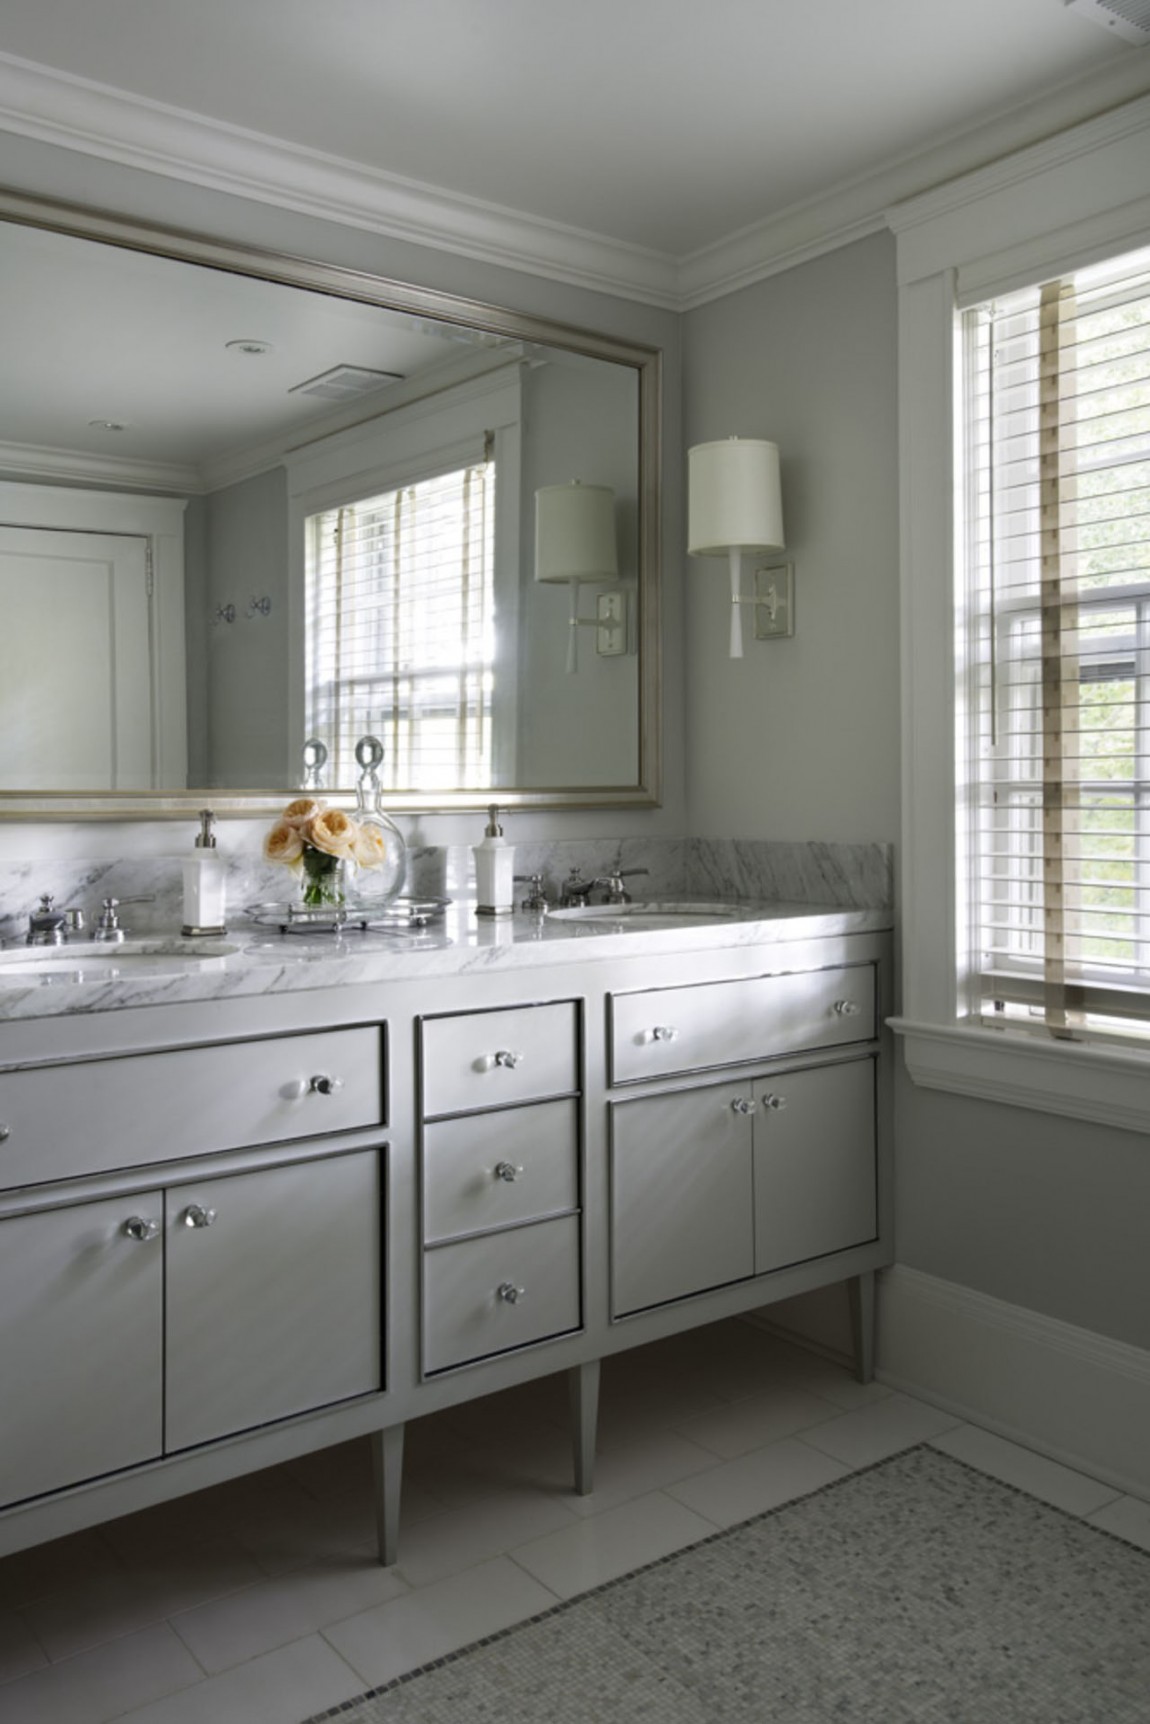 Avon Road Bhdm Stylish Avon Road Residence By BHDM Master Bathroom Idea Involving Double Grey Vanity With Framed Mirror Dream Homes Classic Living Room Style For The Stylish Home Appearance